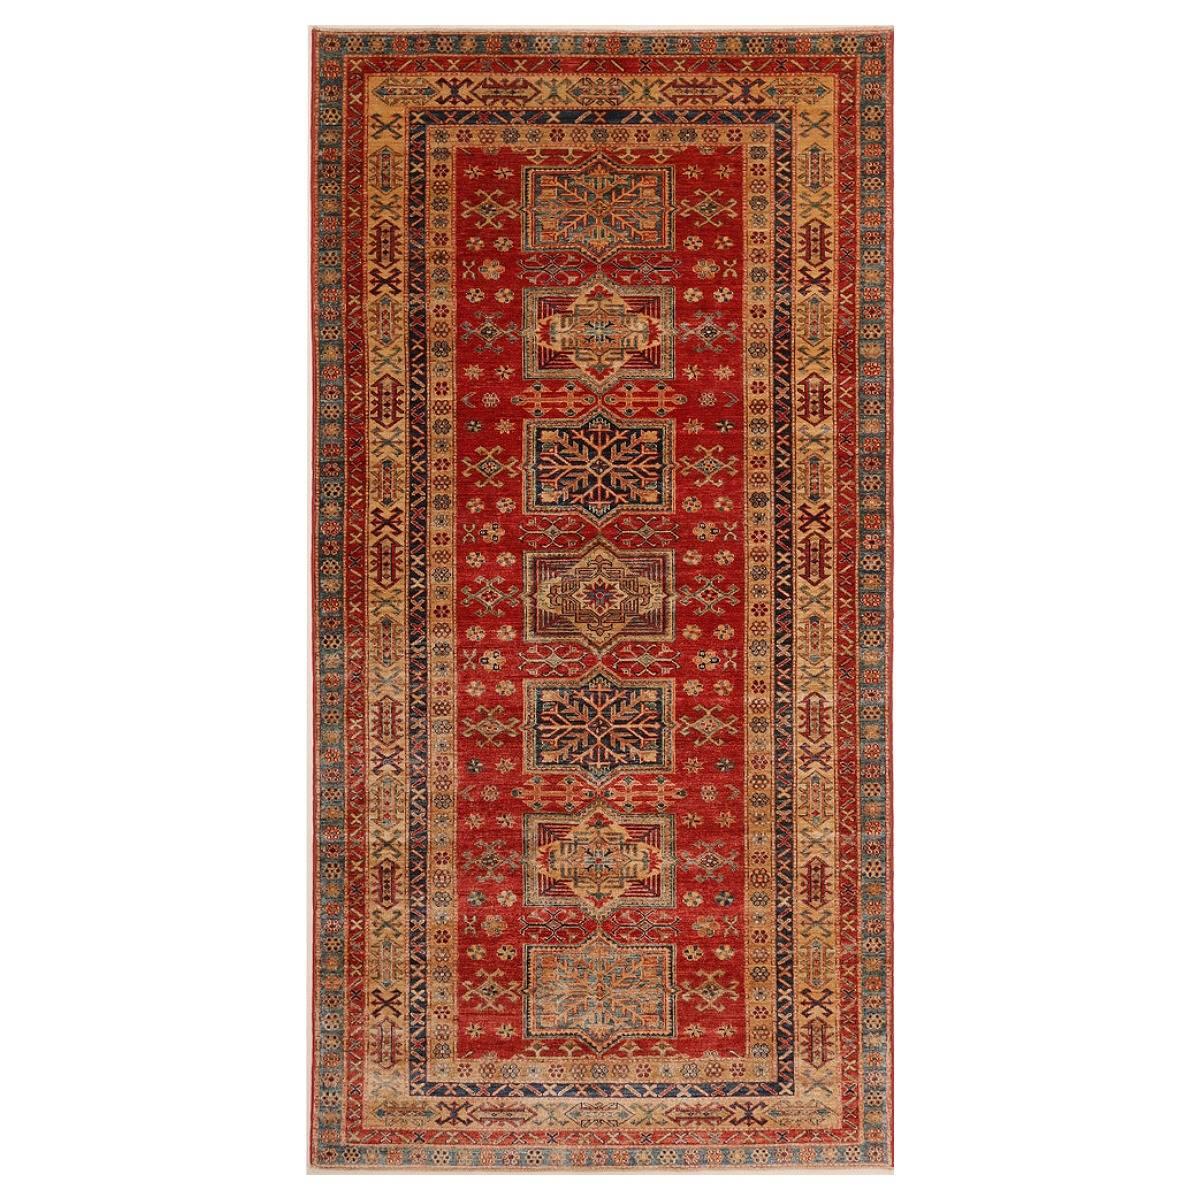 Listed as a pair! 
Beautiful hand-knotted fine Sherwan rugs. Wool pile with low cut. Both rugs are new production of high grade quality. 
We are located in Germany and ship worldwide to customers retail, wholesale and interior designers.